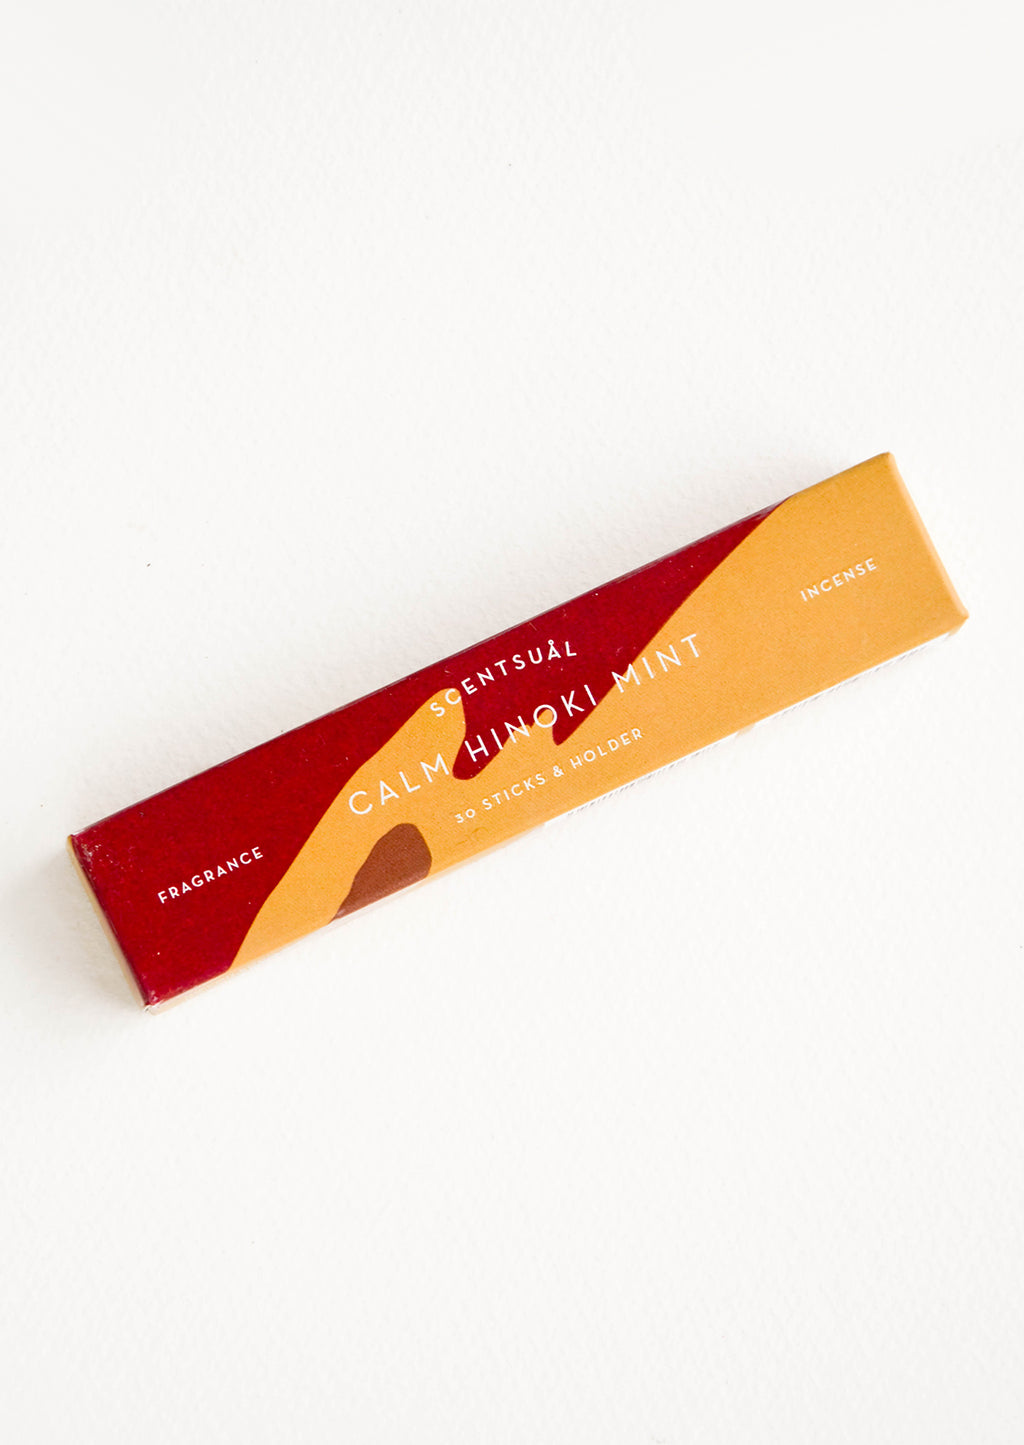 Hinoki Mint: Patterned box in dark red and orange, containing 30 incense sticks in mint scent